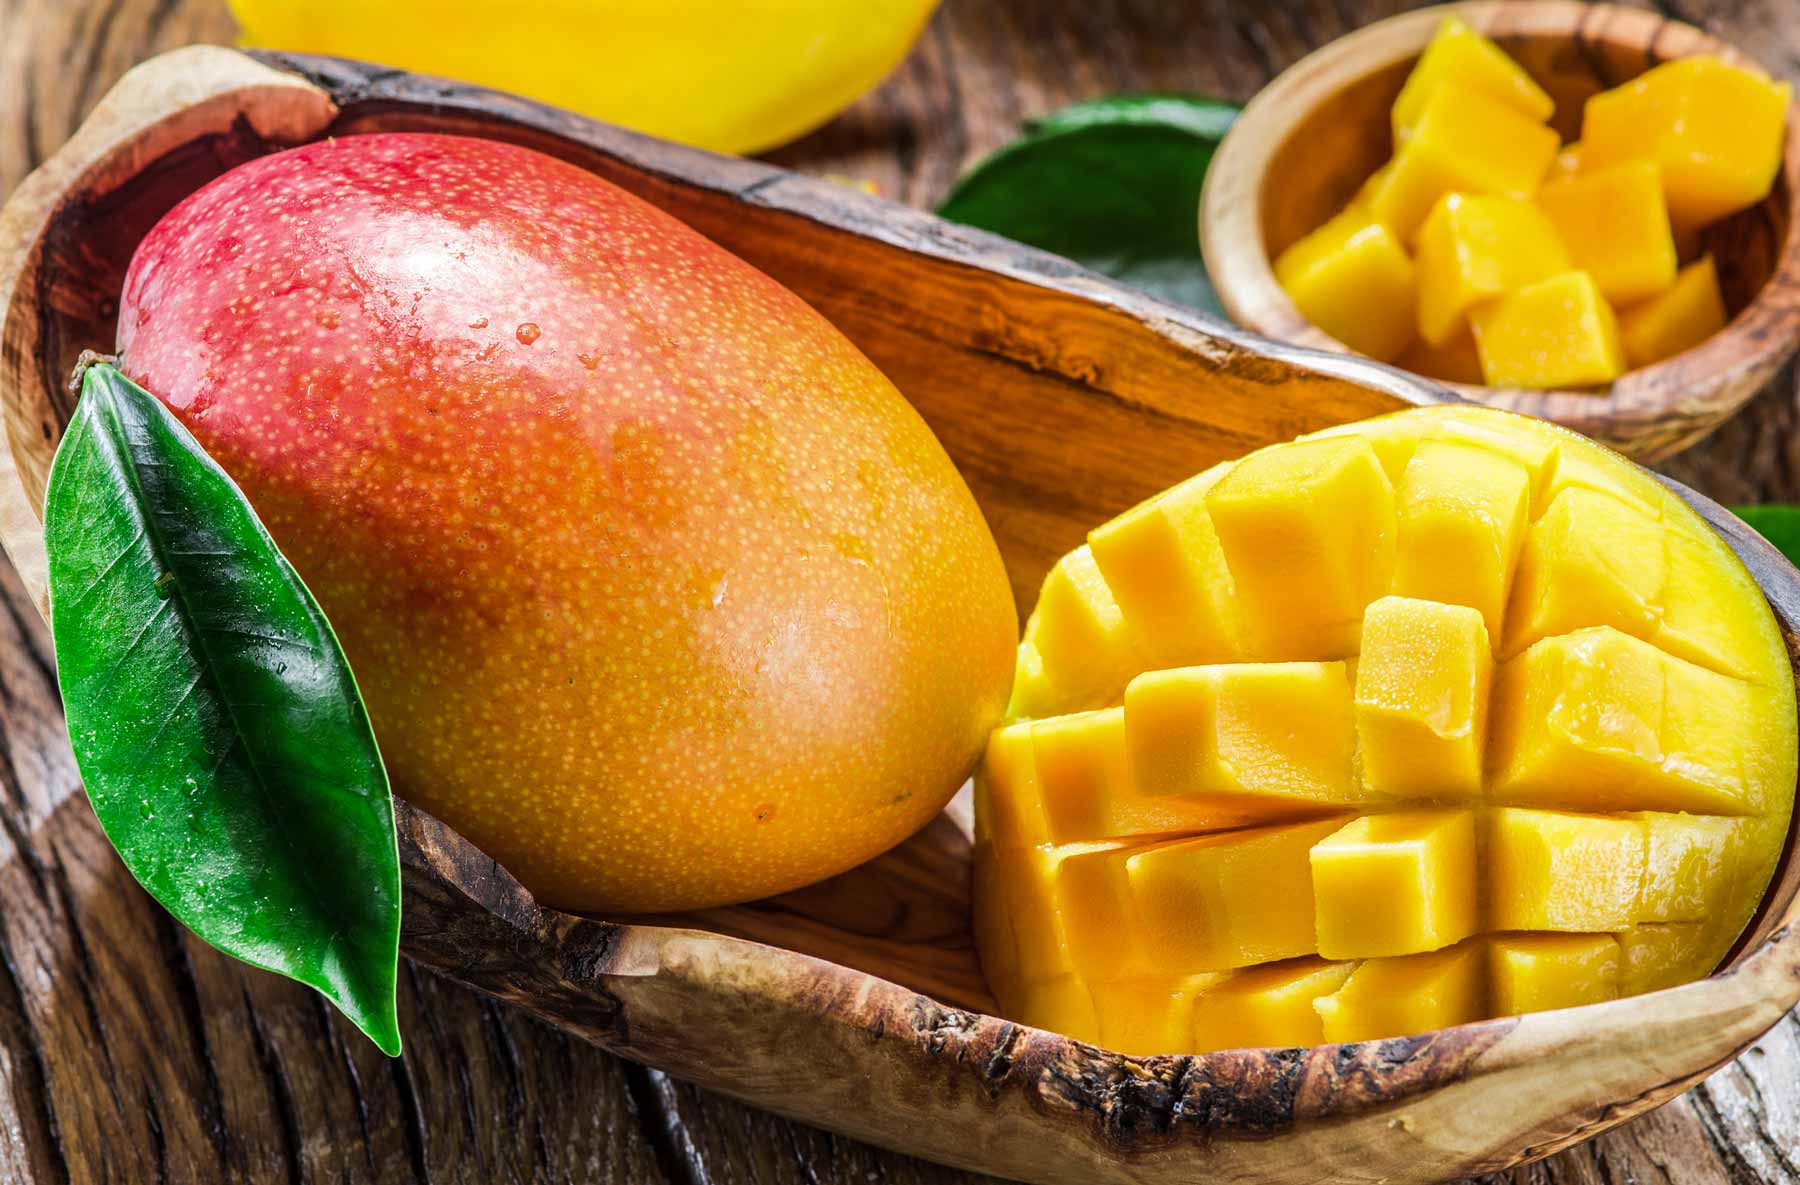 Several health benefits can be derived from mangoes.